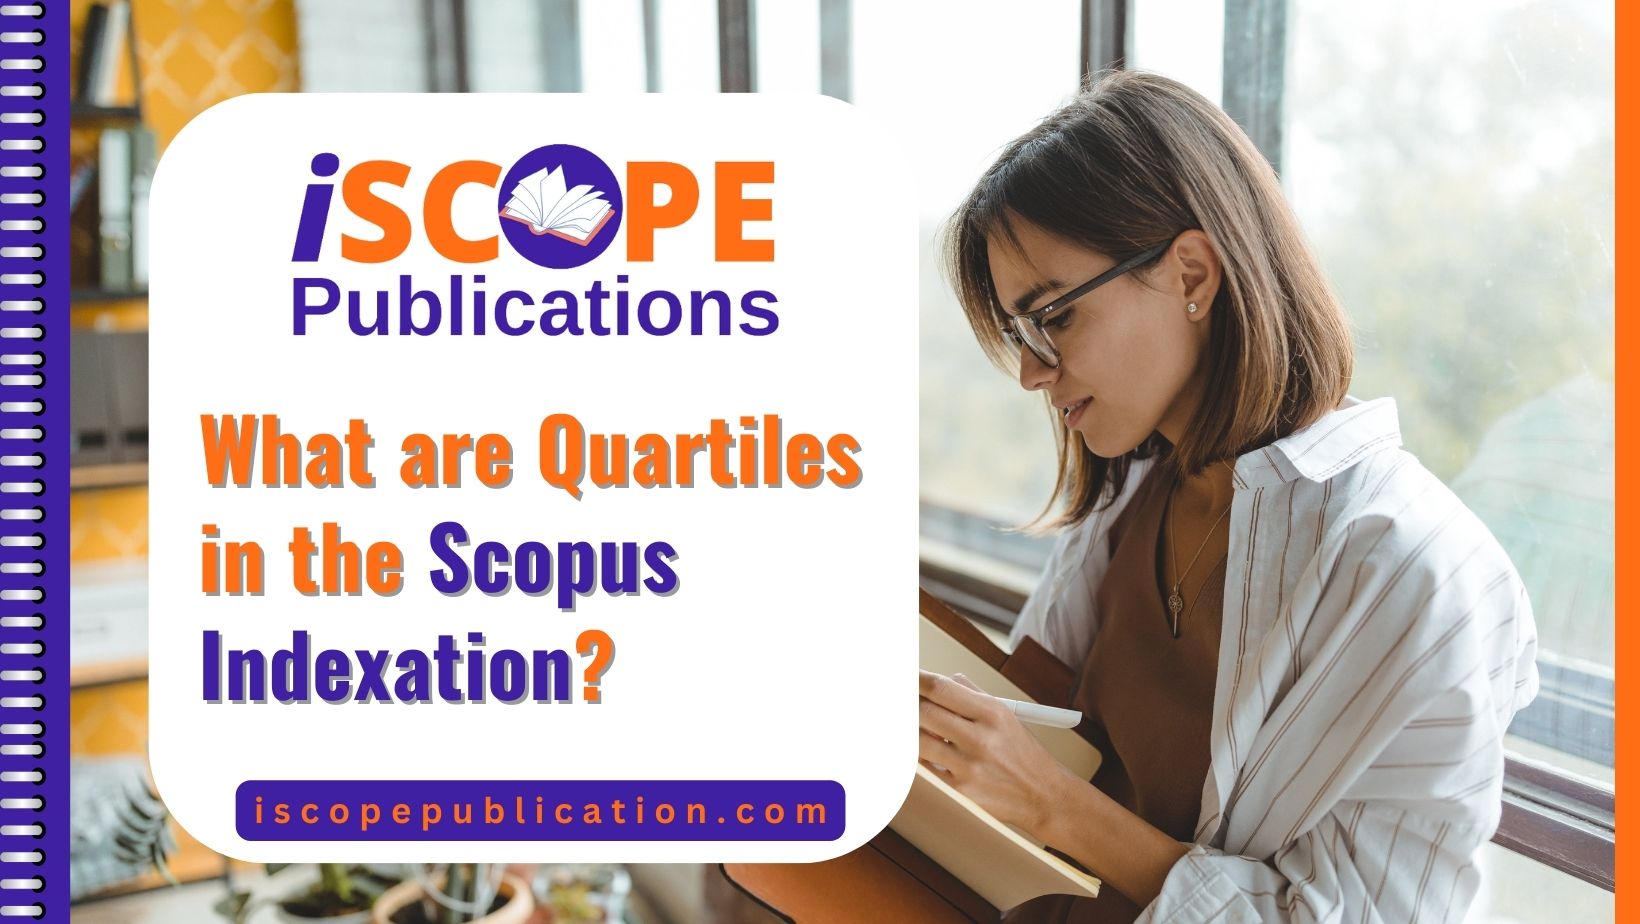 What are Quartiles in the Scopus Indexation?